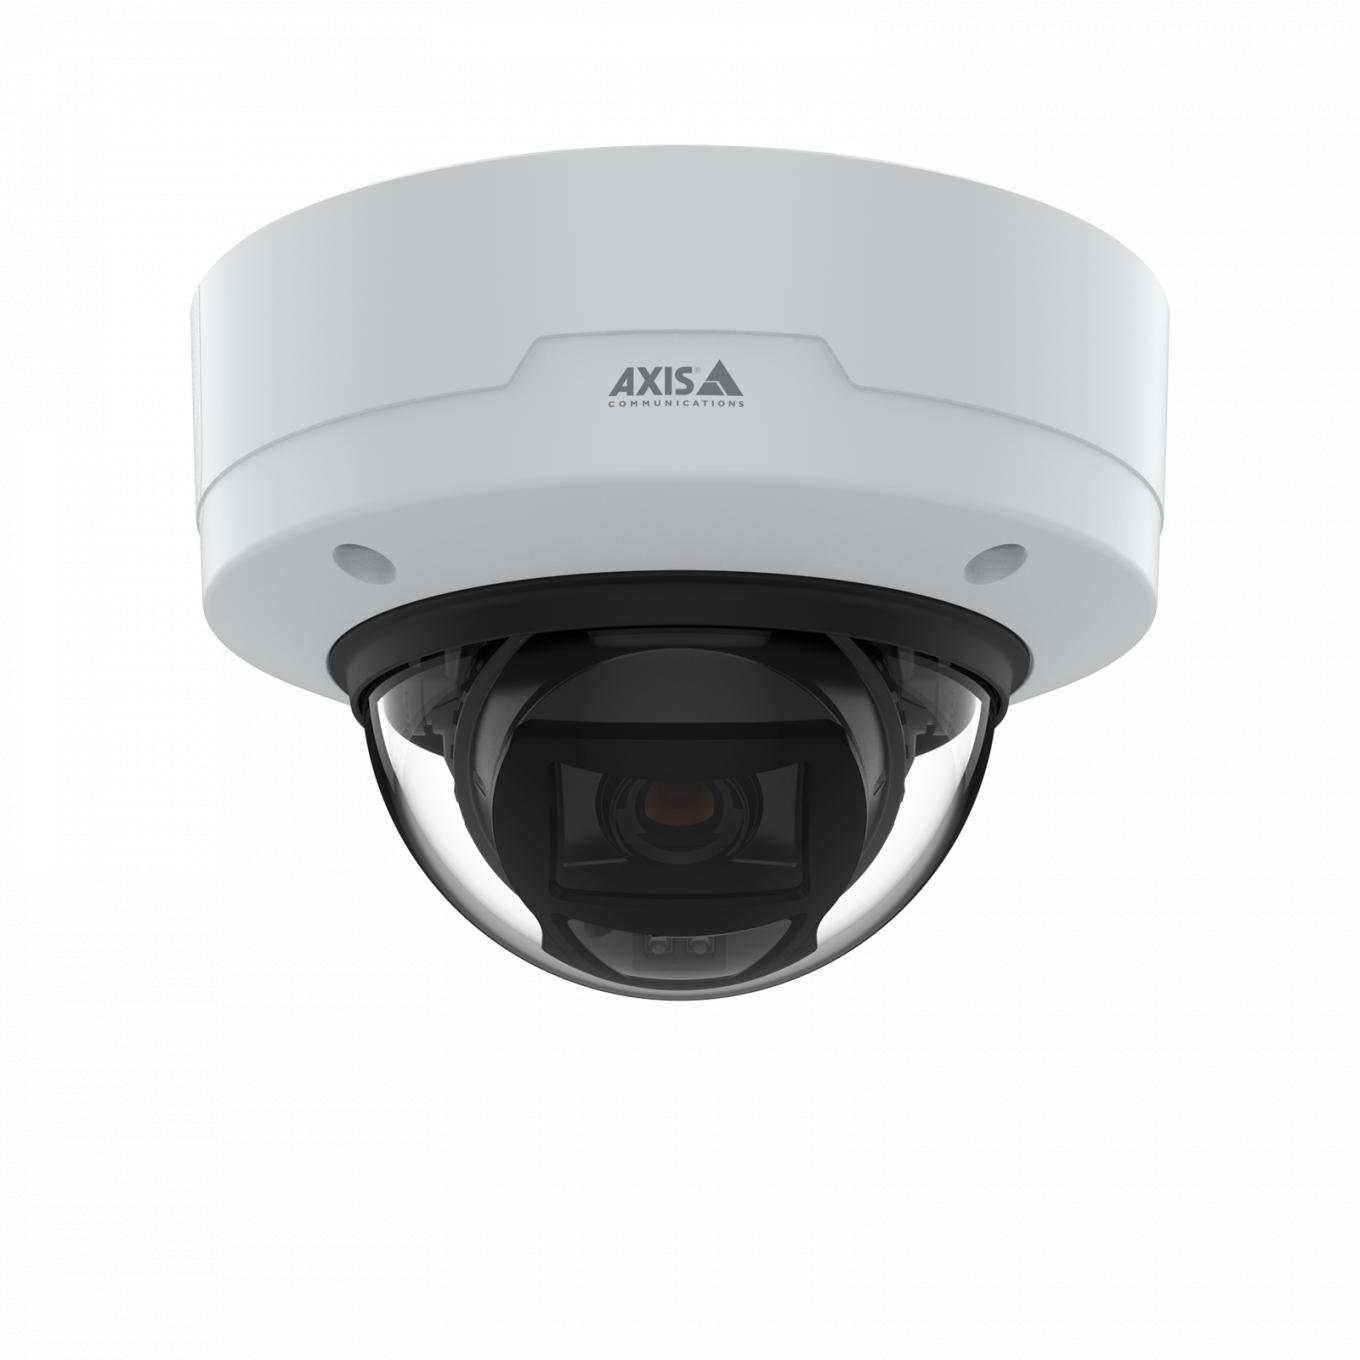 AXIS P3265-LVE Dome Camera mounted in ceiling from front